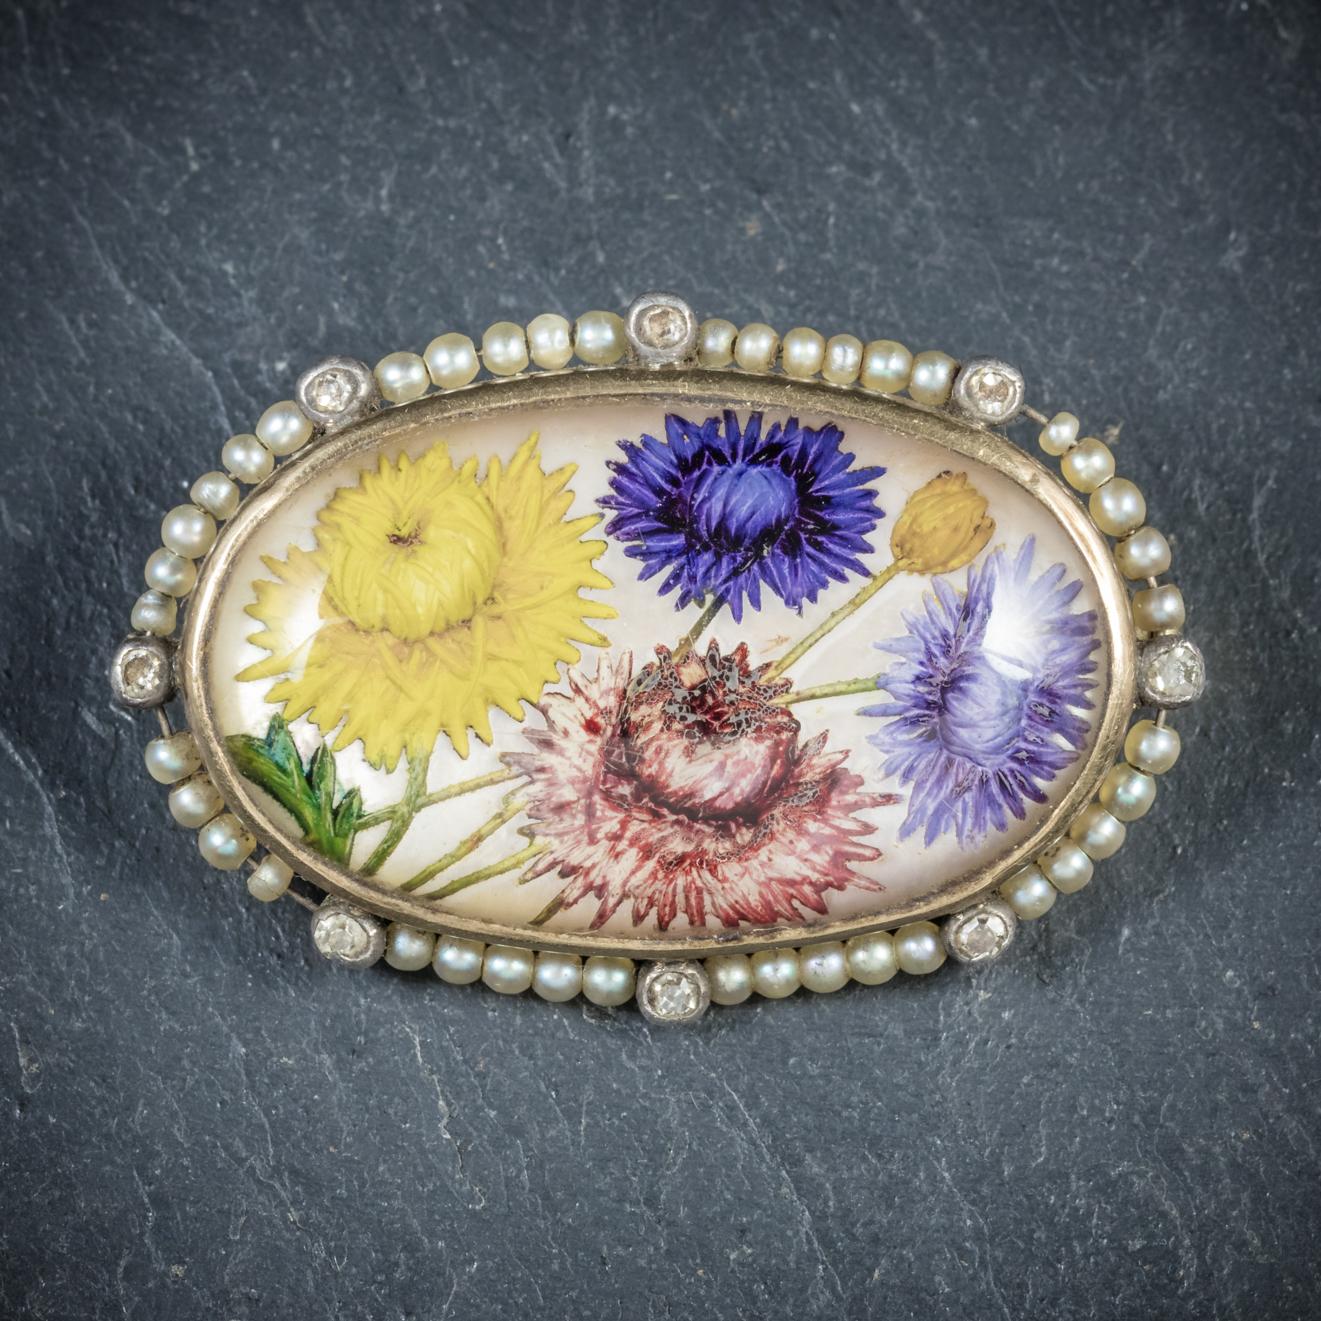 This breathtakingly beautiful antique French flower brooch is from the Victorian era, Circa 1900

A beautiful bouquet of hand painted flowers adorns the centre which is overlaid with Essex Crystal giving the image a fabulous three dimensional